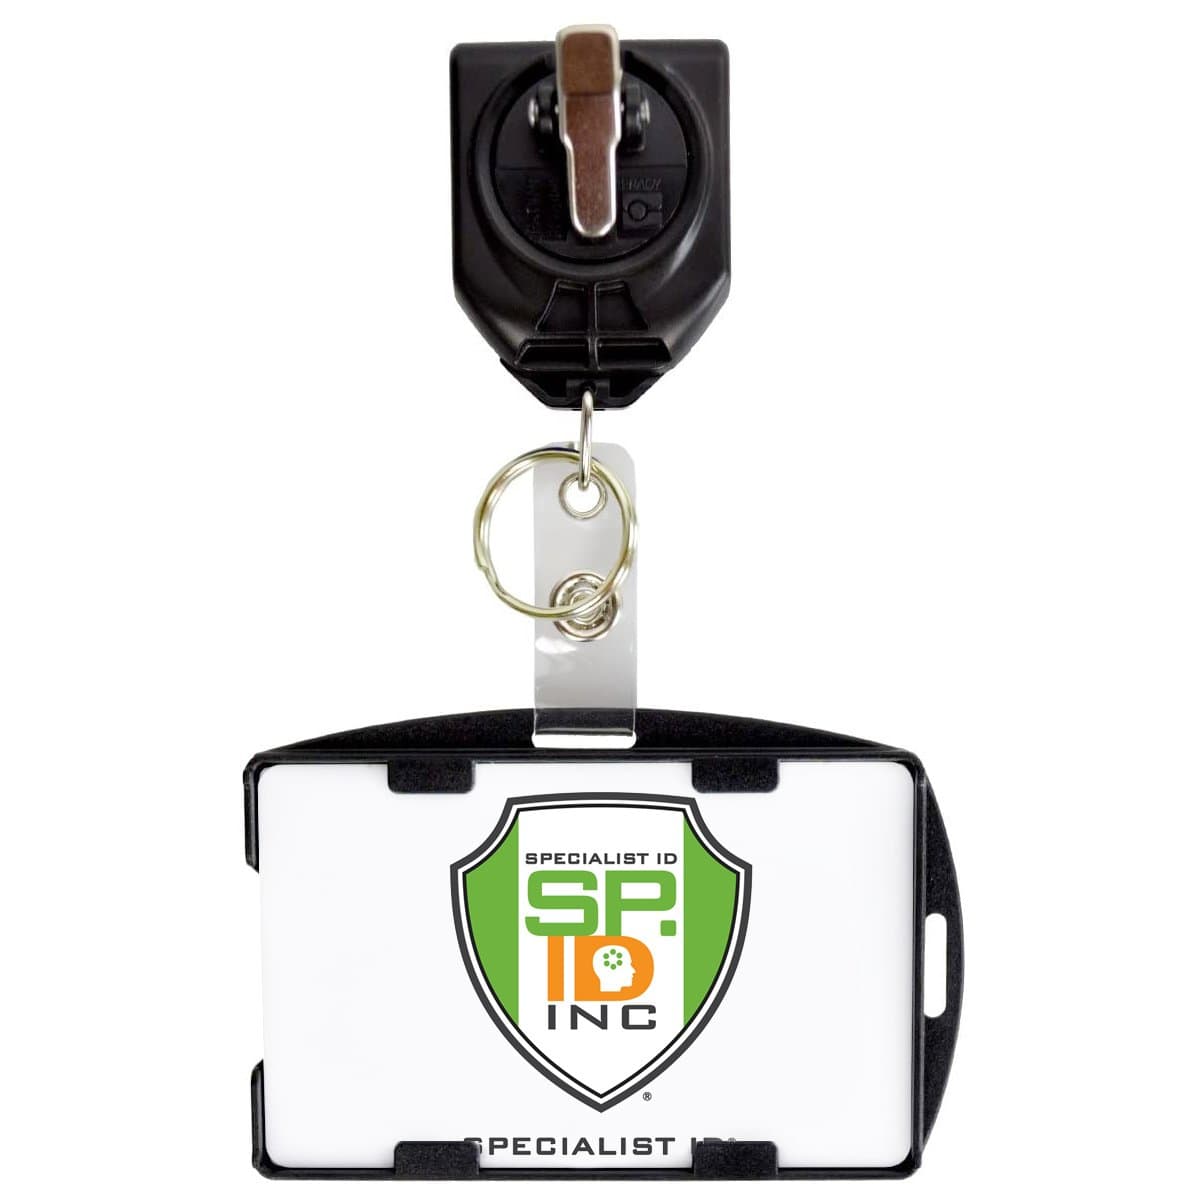 A SkimSAFE FIPS 201 RFID Blocking 2-Card ID Holder (AH-210) with a black clip and plastic casing for a card displaying the "Specialist ID Inc" logo in green and orange, featuring RFID blocking technology for added security.